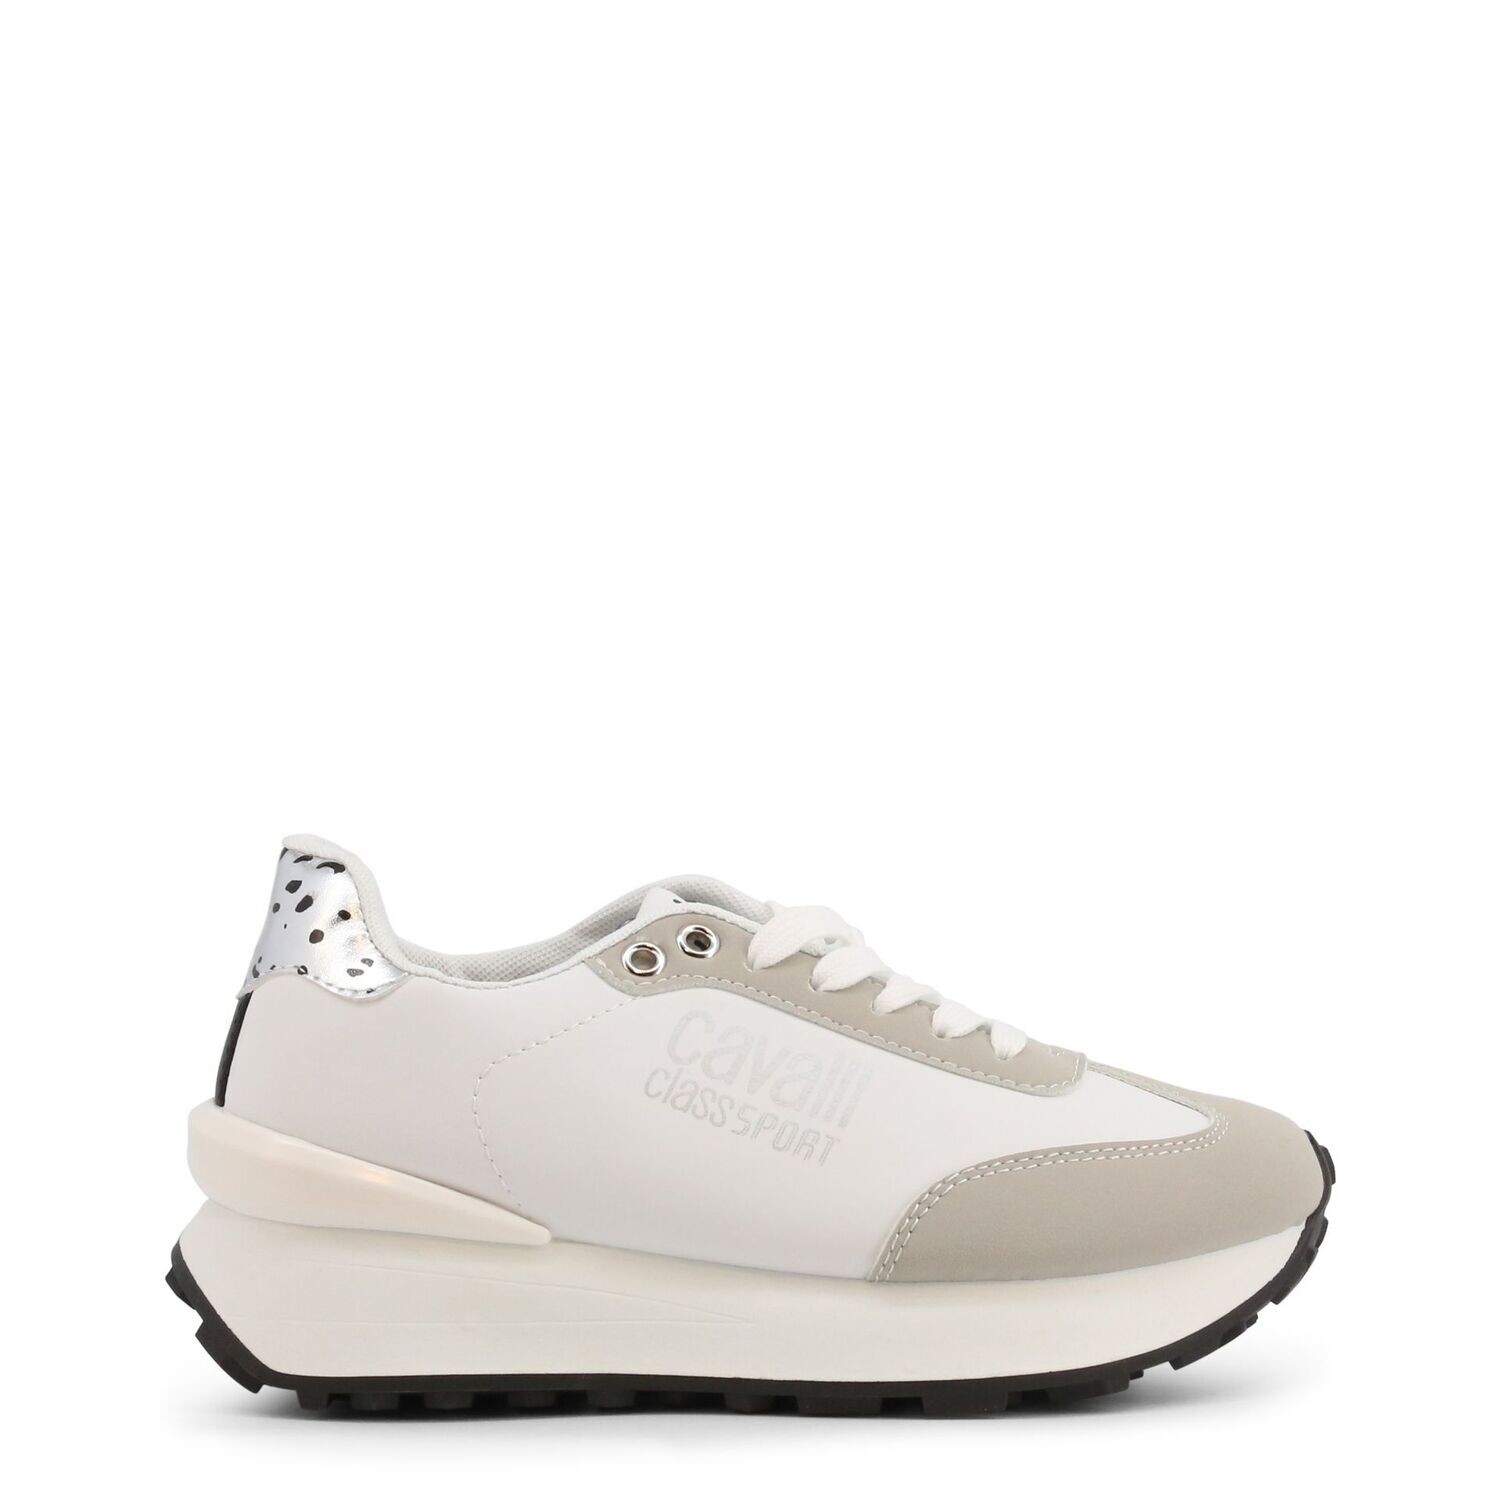 Cavalli Class White And Beige Trainers